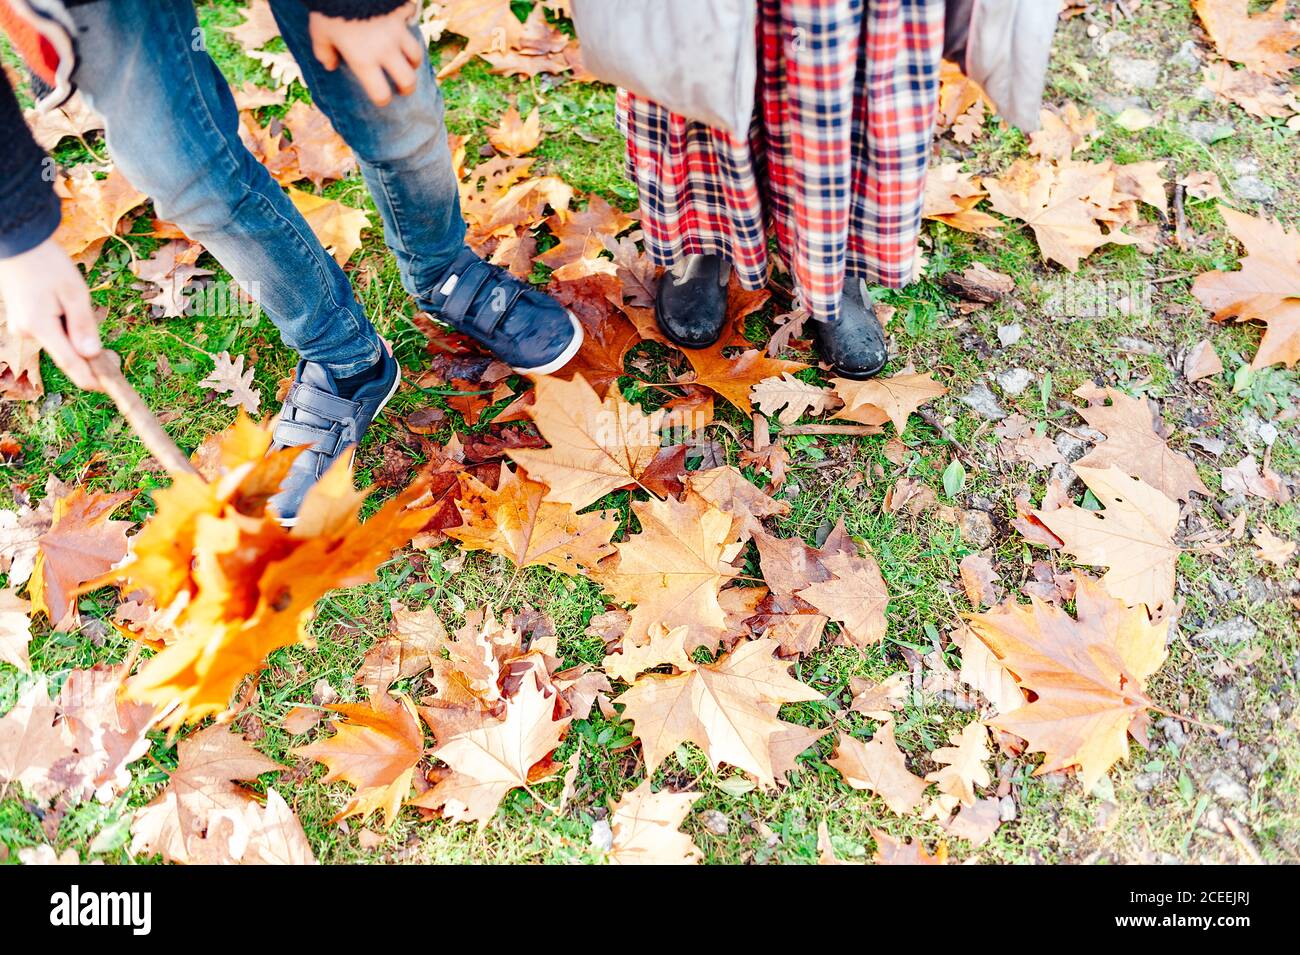 Feet of children treading leaves in the countryside Stock Photo